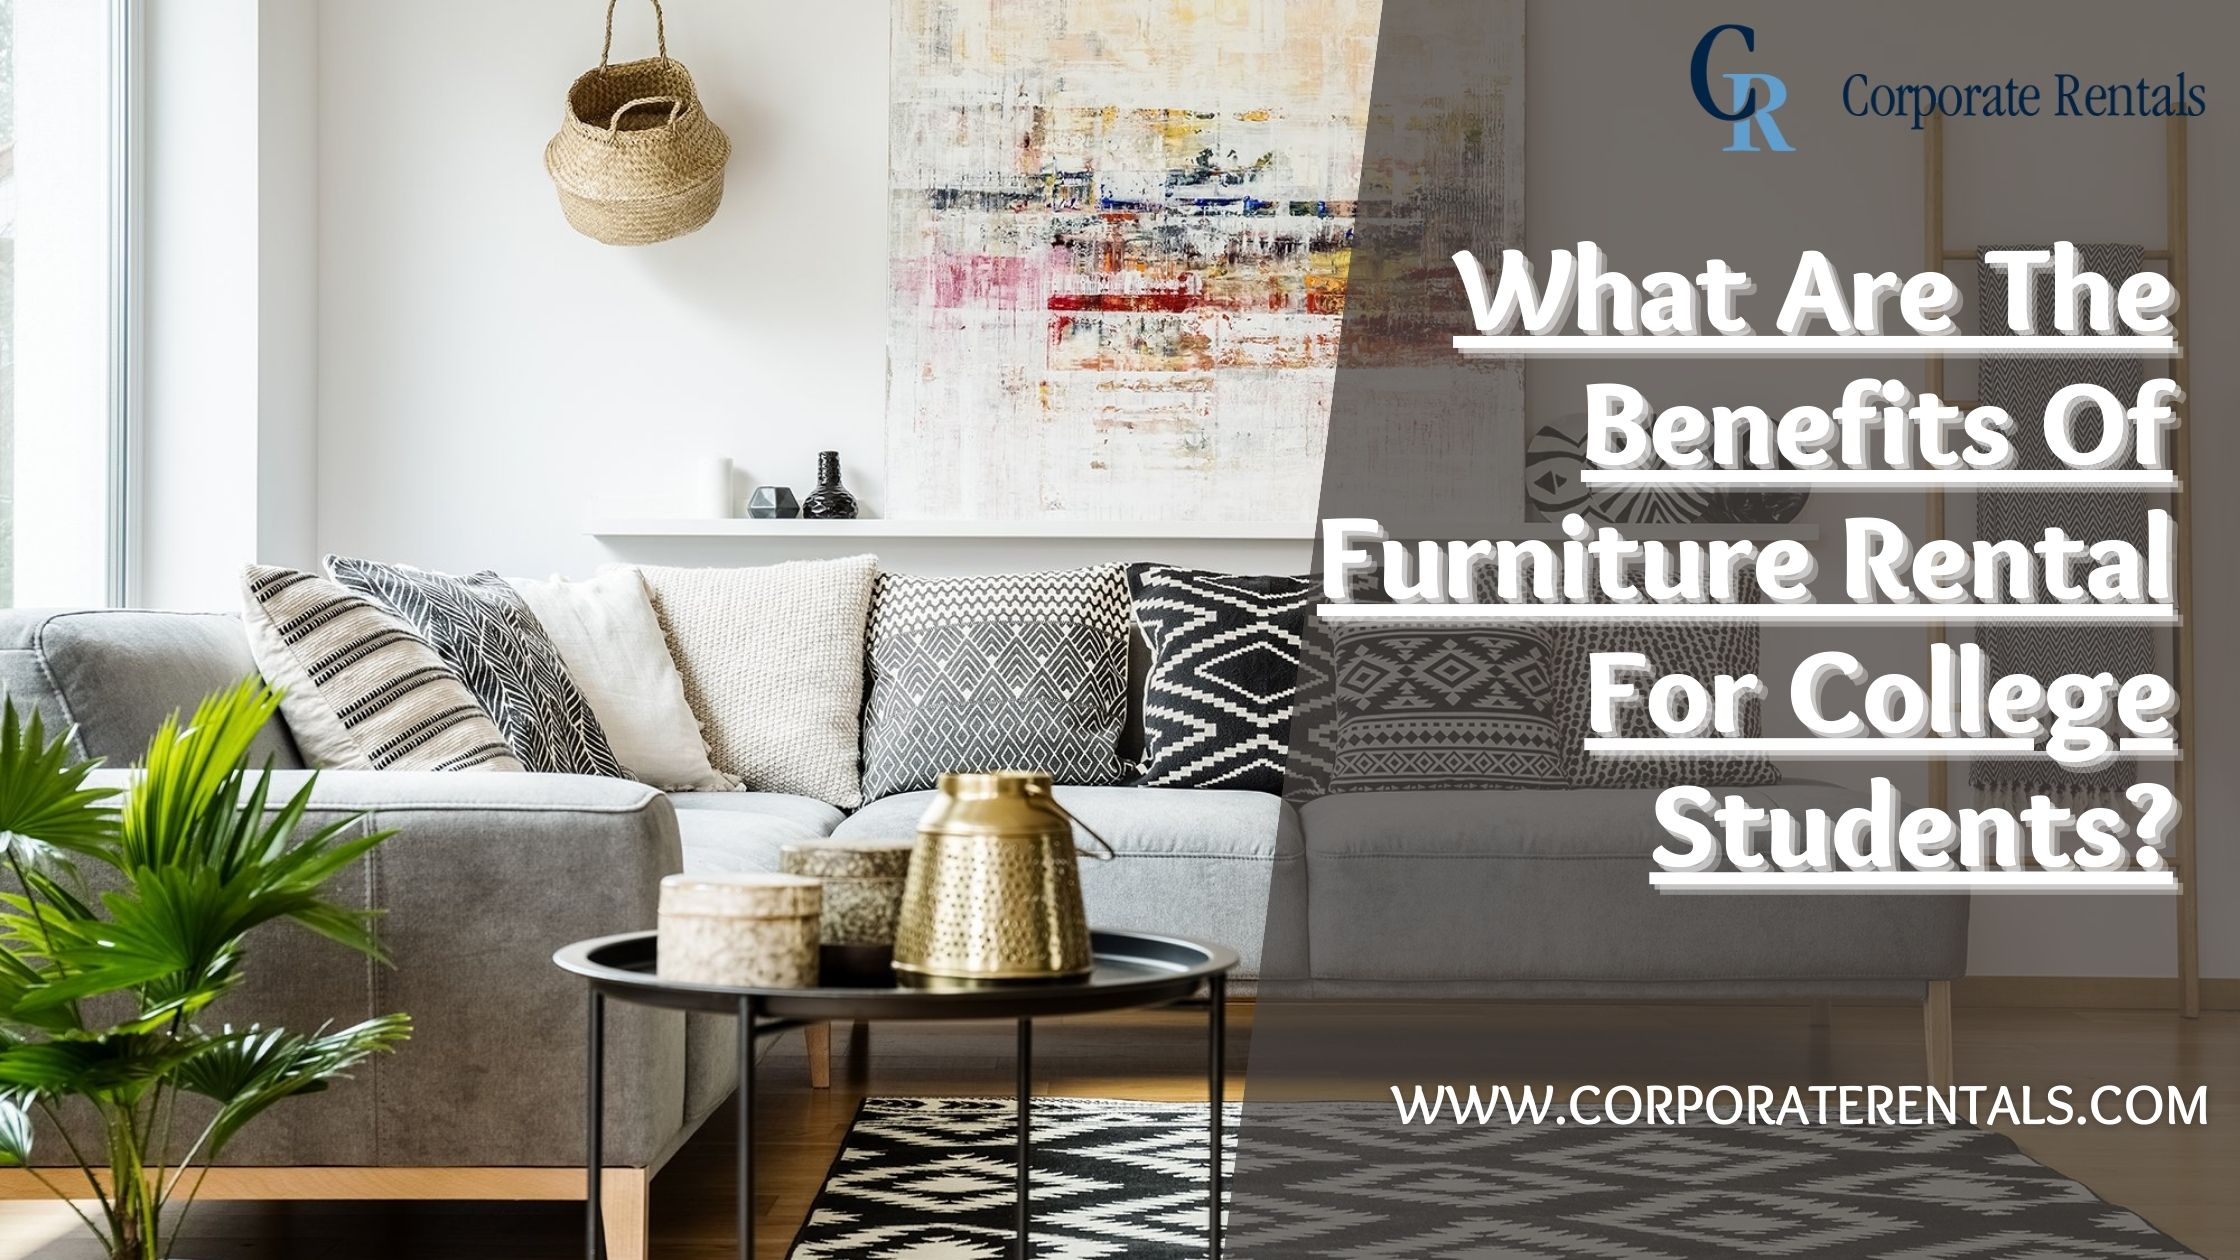 What Are The Benefits Of Furniture Rental For College Students?